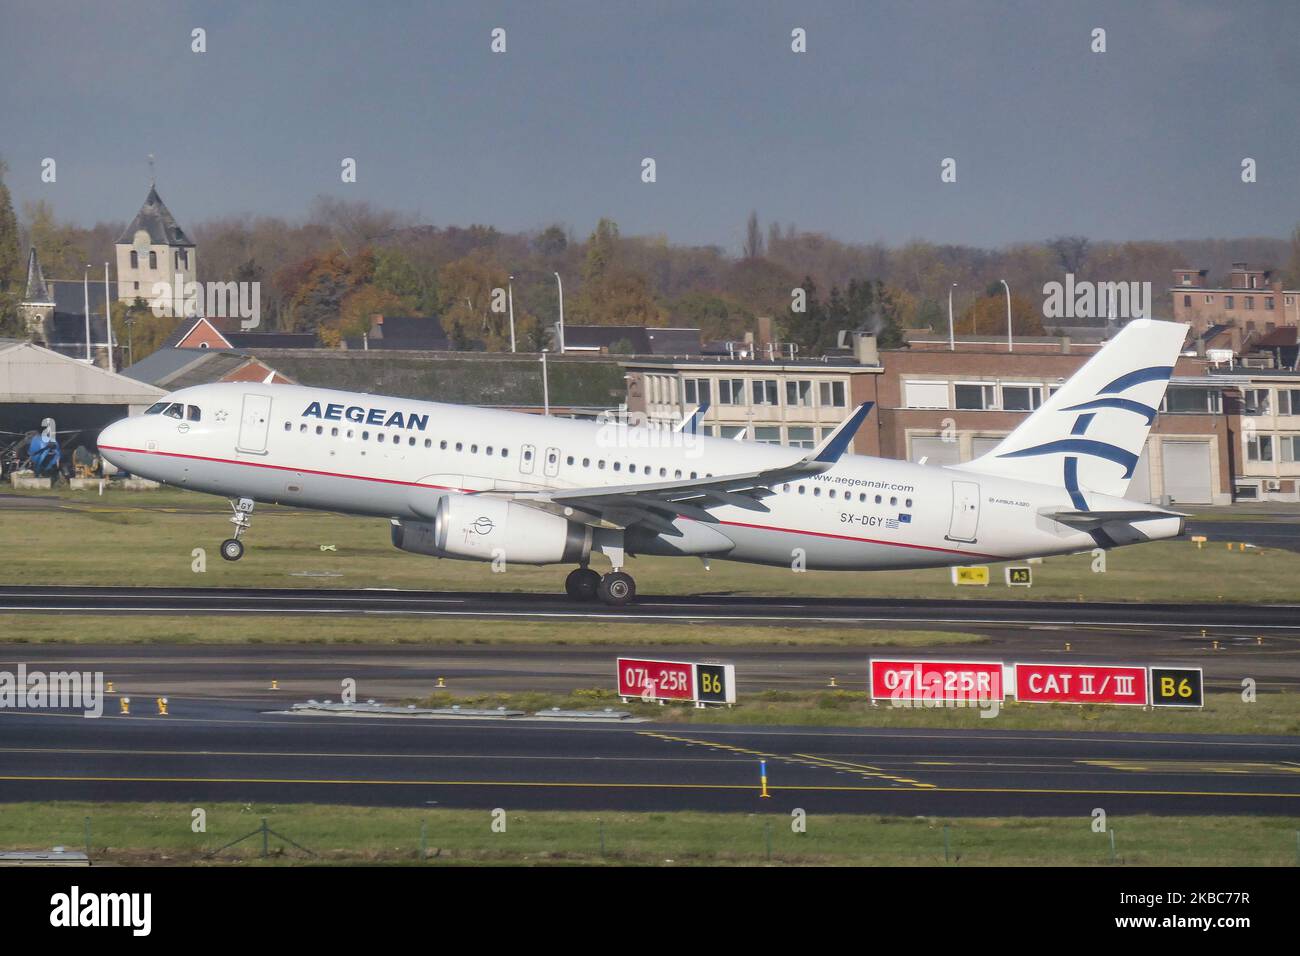 Aegean Airlines Airbus A320-200 aircraft as seen departing on rotation phase becoming airborne from Brussels Nationaal Airport Zaventem BRU EBBR during on 19 November 2019. The take-off airplane has the registration SX-DGY with 2x IAE jet engines. The airline is the flag carrier of Greece and largest Greek airline, connecting the Belgian capital with Athens ATH LGAV airport on a daily basis. A3 AEE is a Star Alliance aviation alliance member. (Photo by Nicolas Economou/NurPhoto) Stock Photo